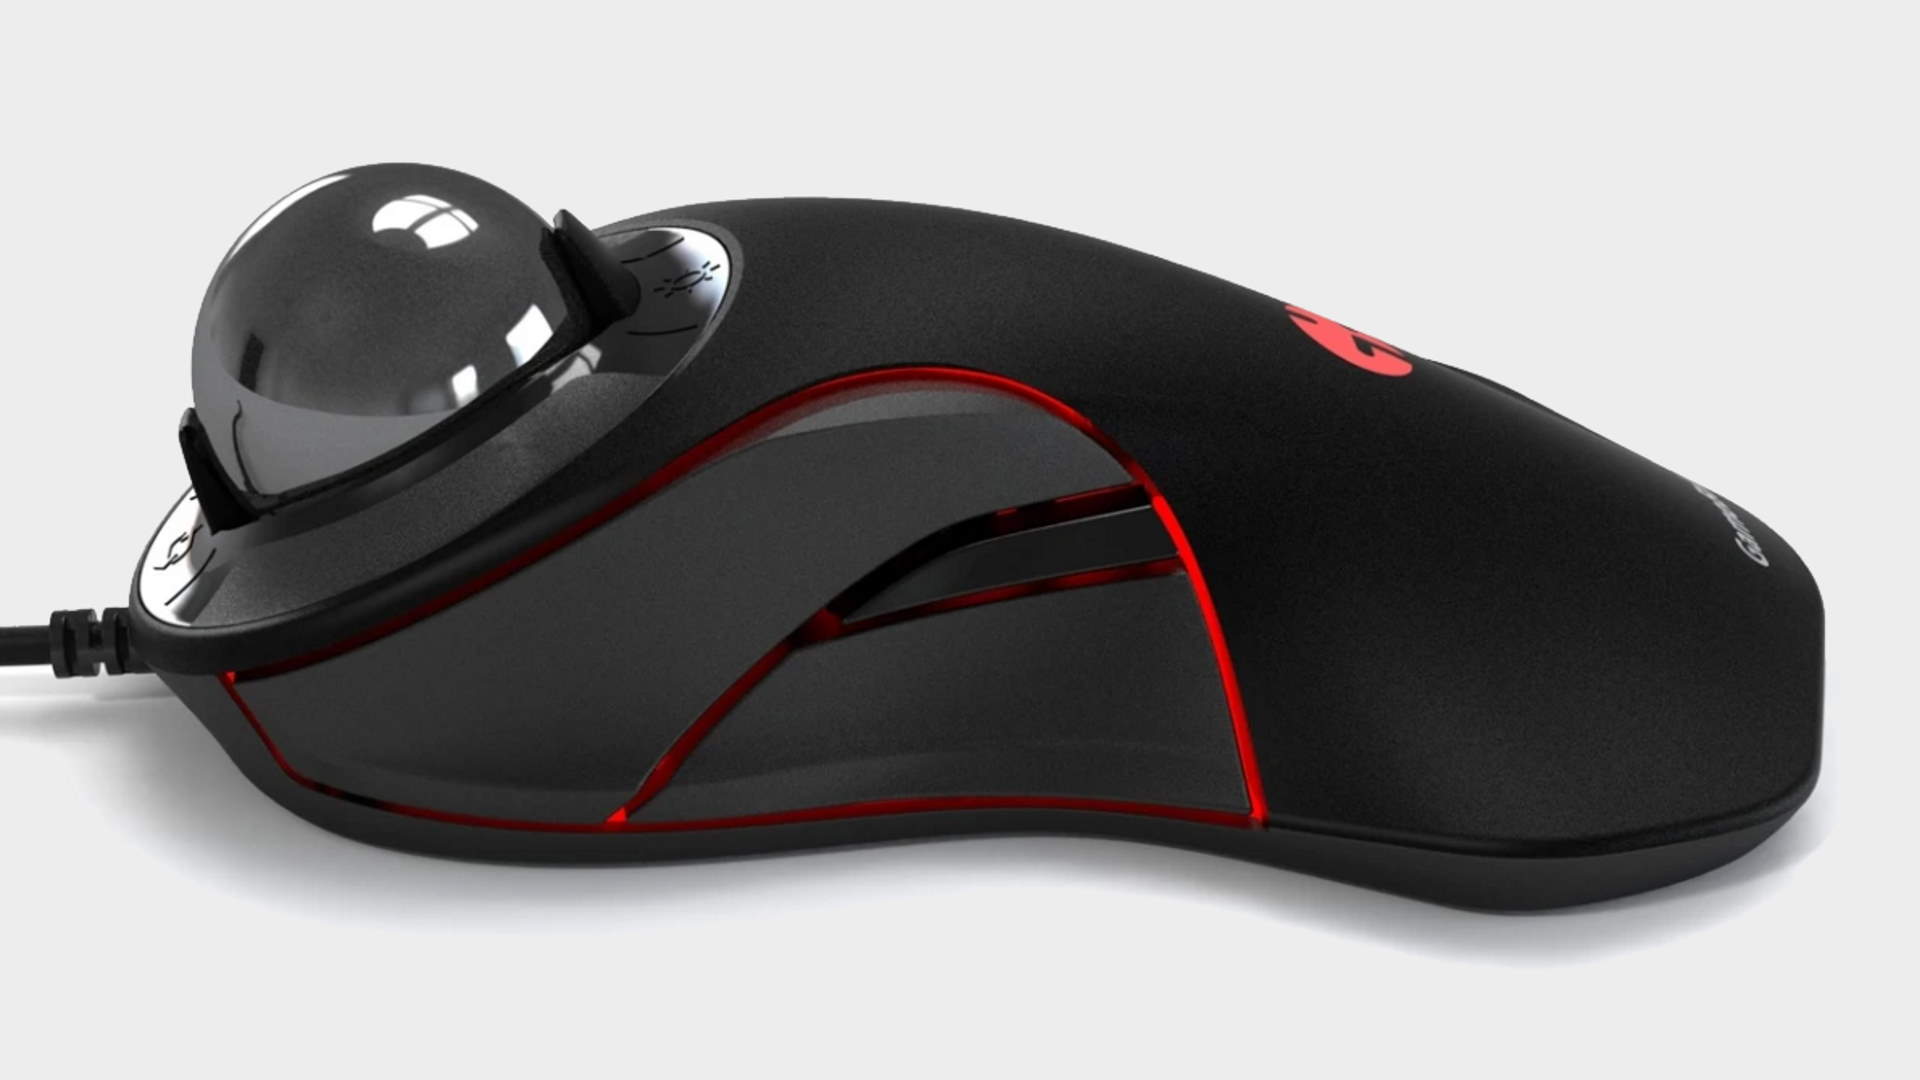 trackball mouse gaming